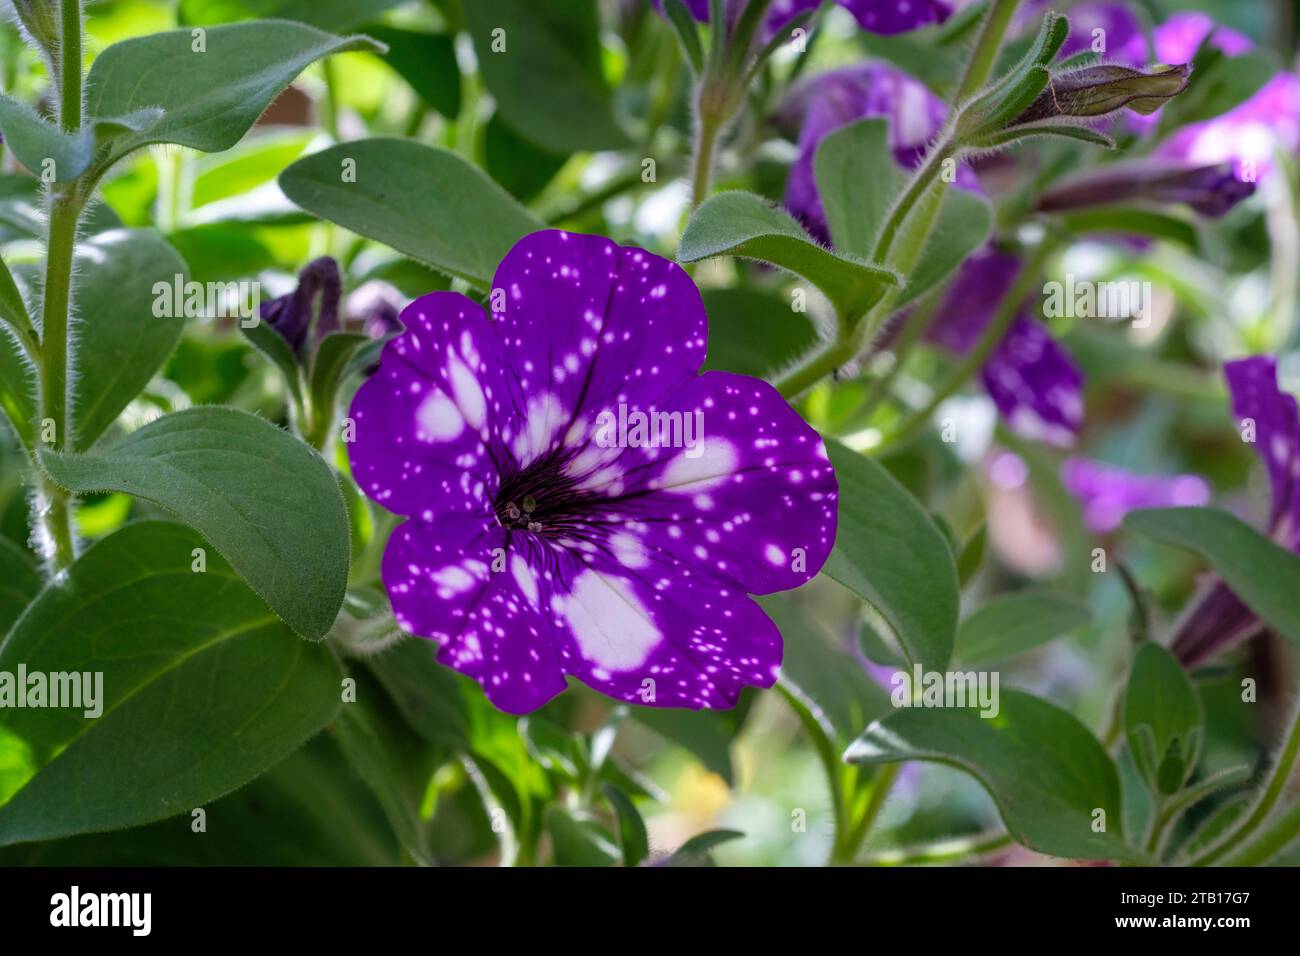 Night Sky Petunia, starry speckled pattern of white blotches on purple ...